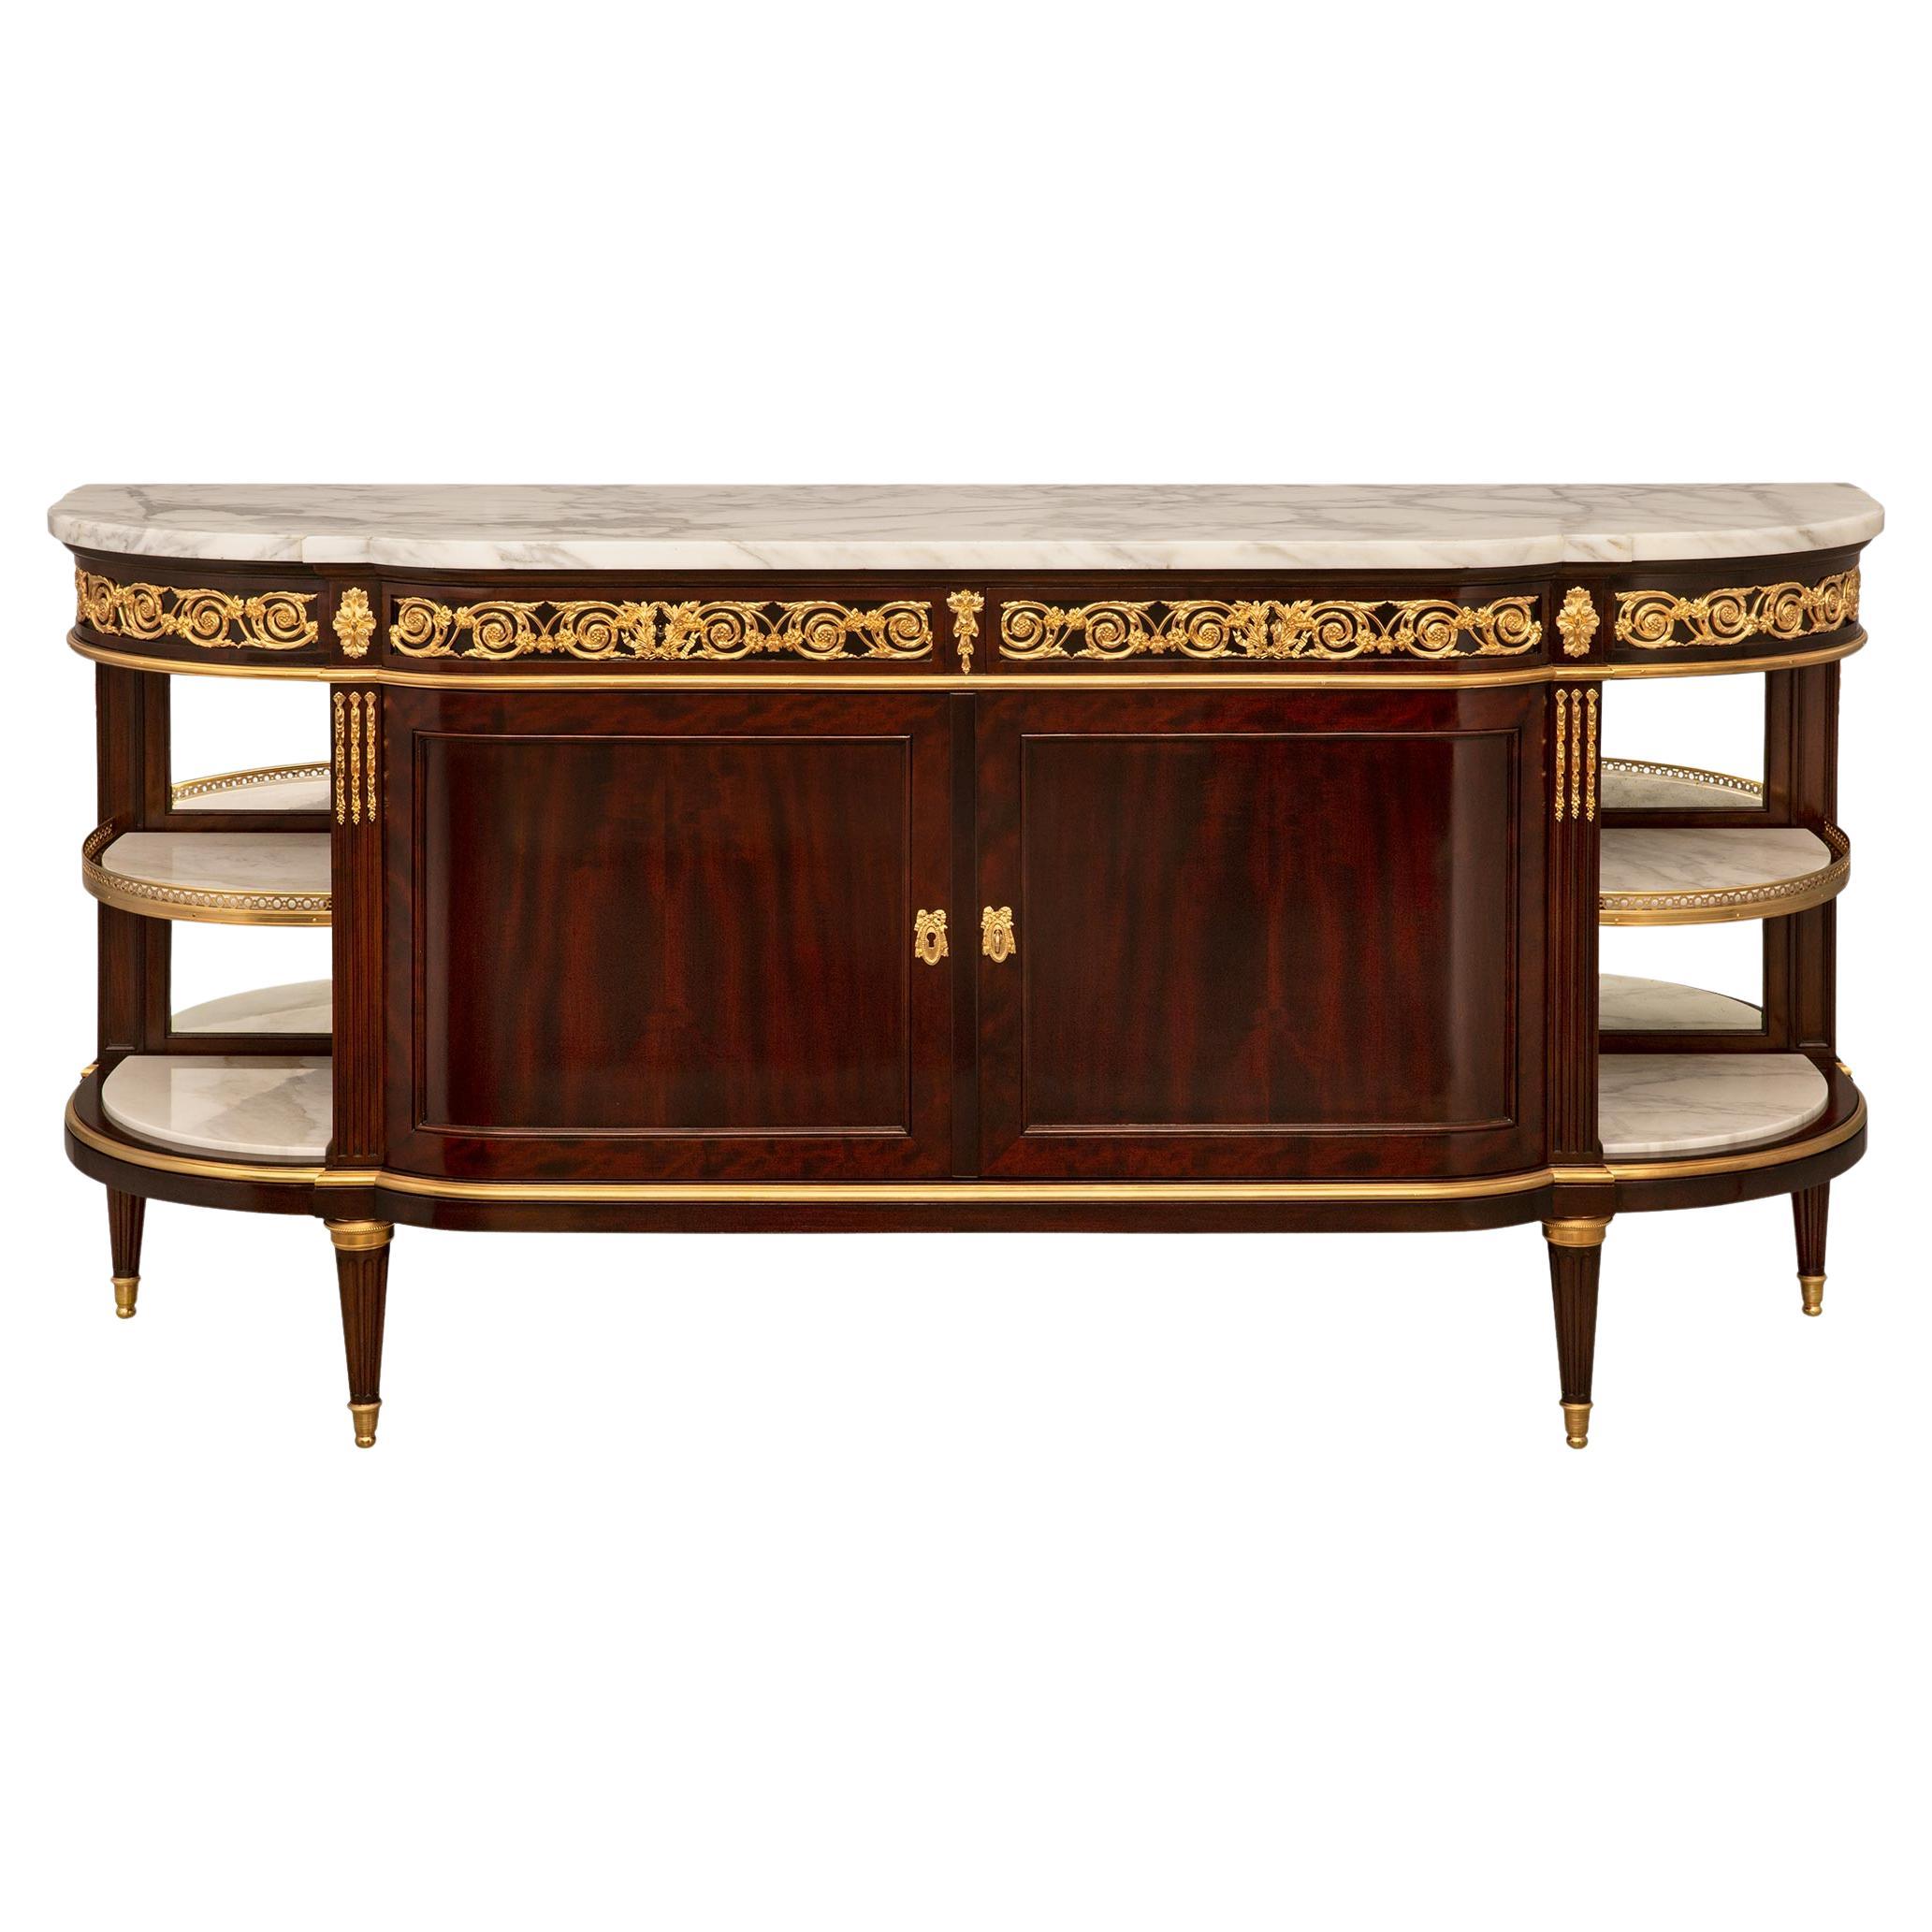 A French 19th century Louis XVI st. Belle Époque buffet signed by Paul Somani For Sale